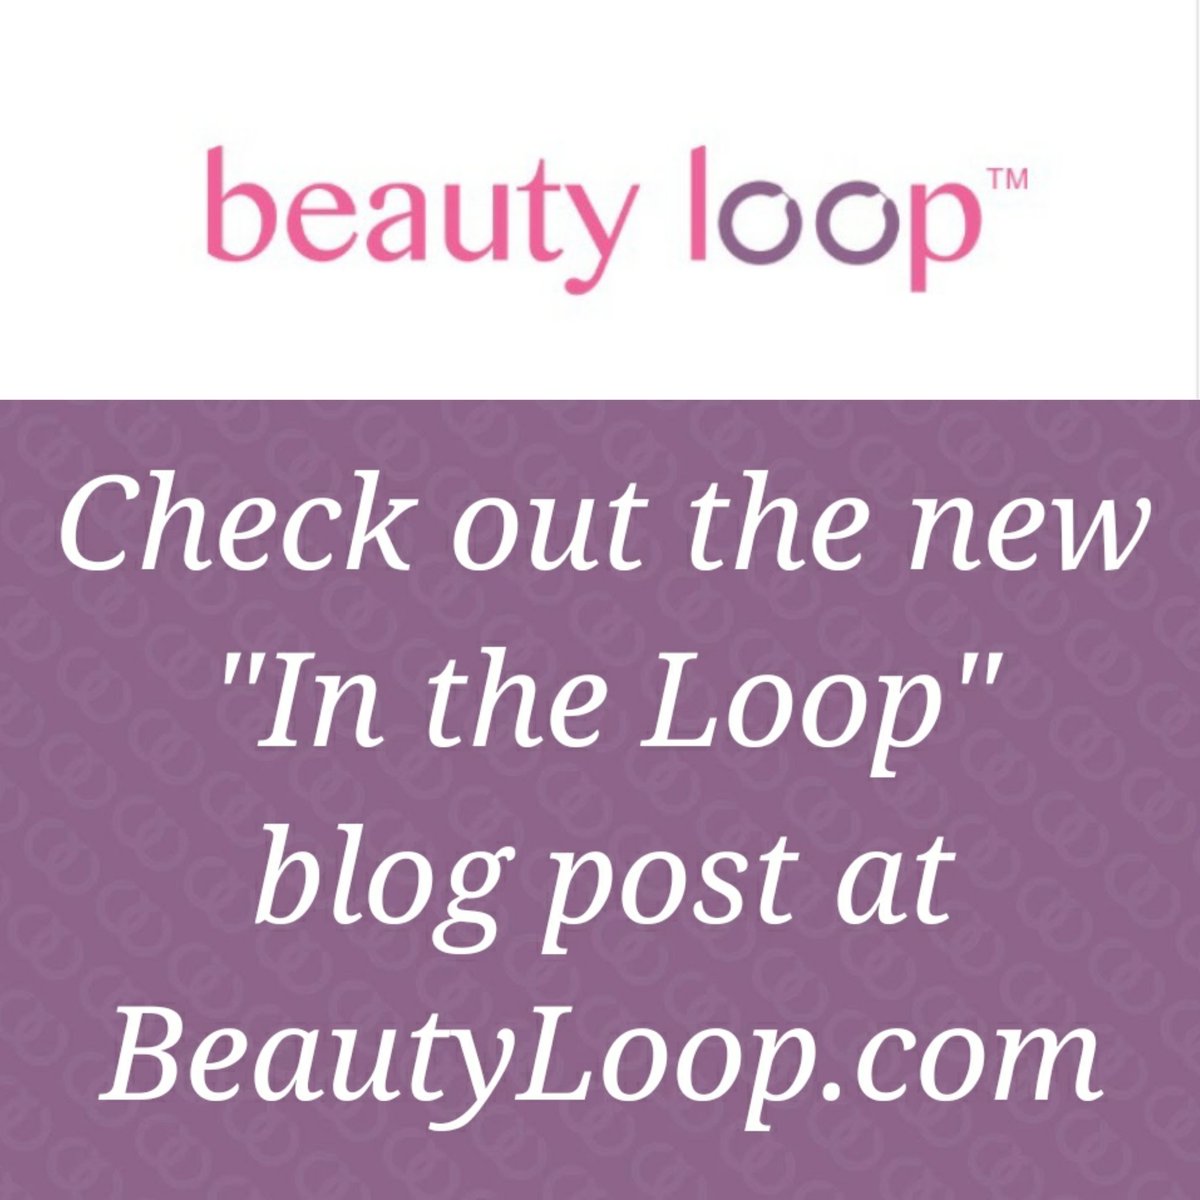 We just posted our new 'IN THE LOOP' blog post where I share some of my favorite beauty finds. Link in bio. #mybeautyloop #antiagingproducts #naildipping #naildippingpowder #beautymusts #beautytipsandtricks #beautytips #beautyblogger #bblogger #beautylooppillow #antiwrinklepillow